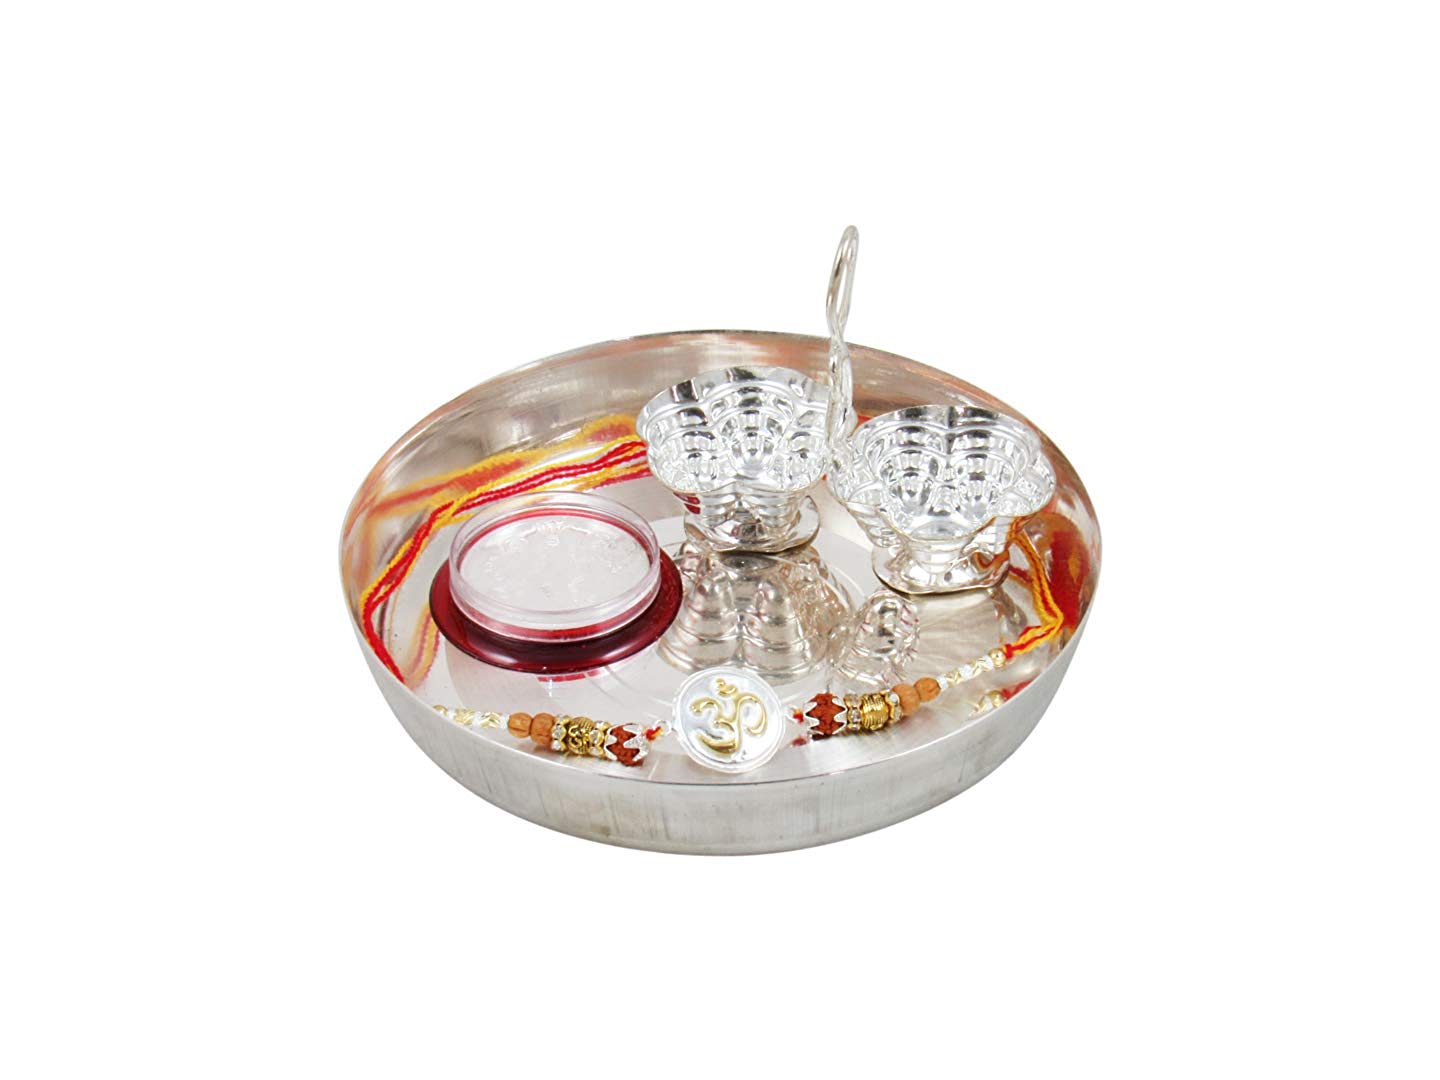 GoldGiftIdeas Pure 999 Silver Om Rakhi for Brother with Pooja Thali Set (5 Inch), Golden -Si[MEN's]